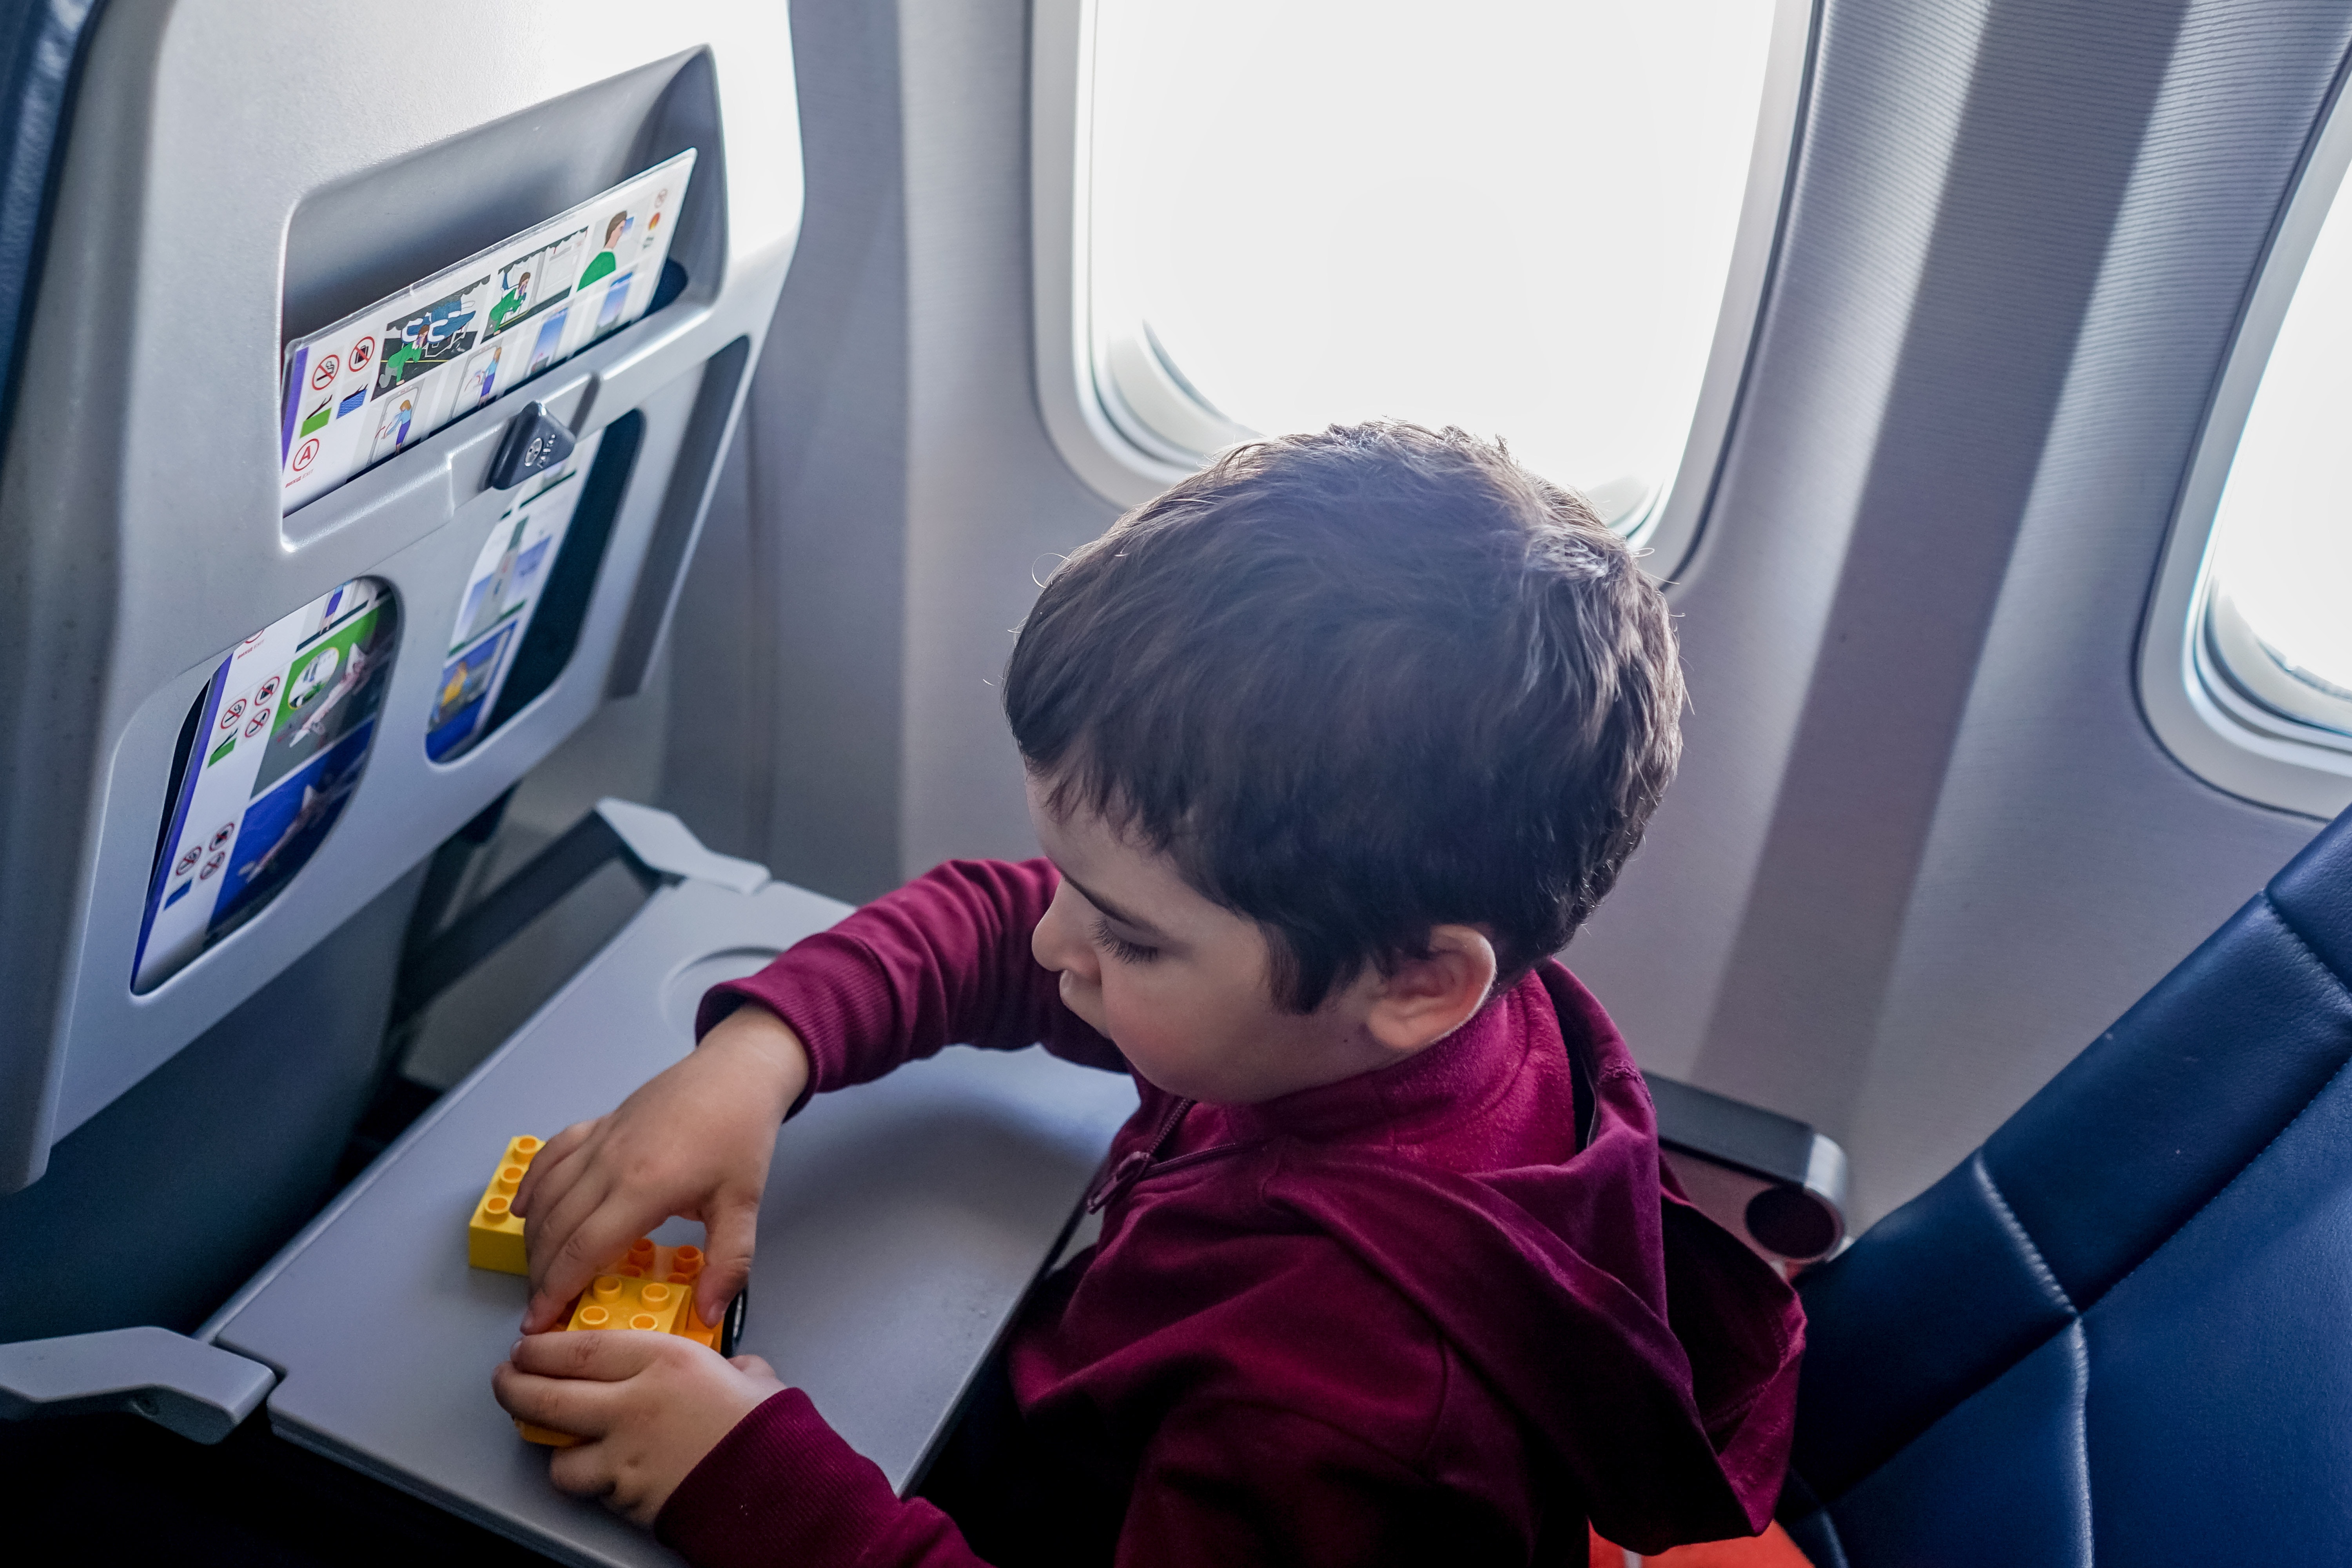 photo by oleksandr pidvalnyi: https://www.pexels.com/photo/boy-playing-with-toy-on-plane-5771207/